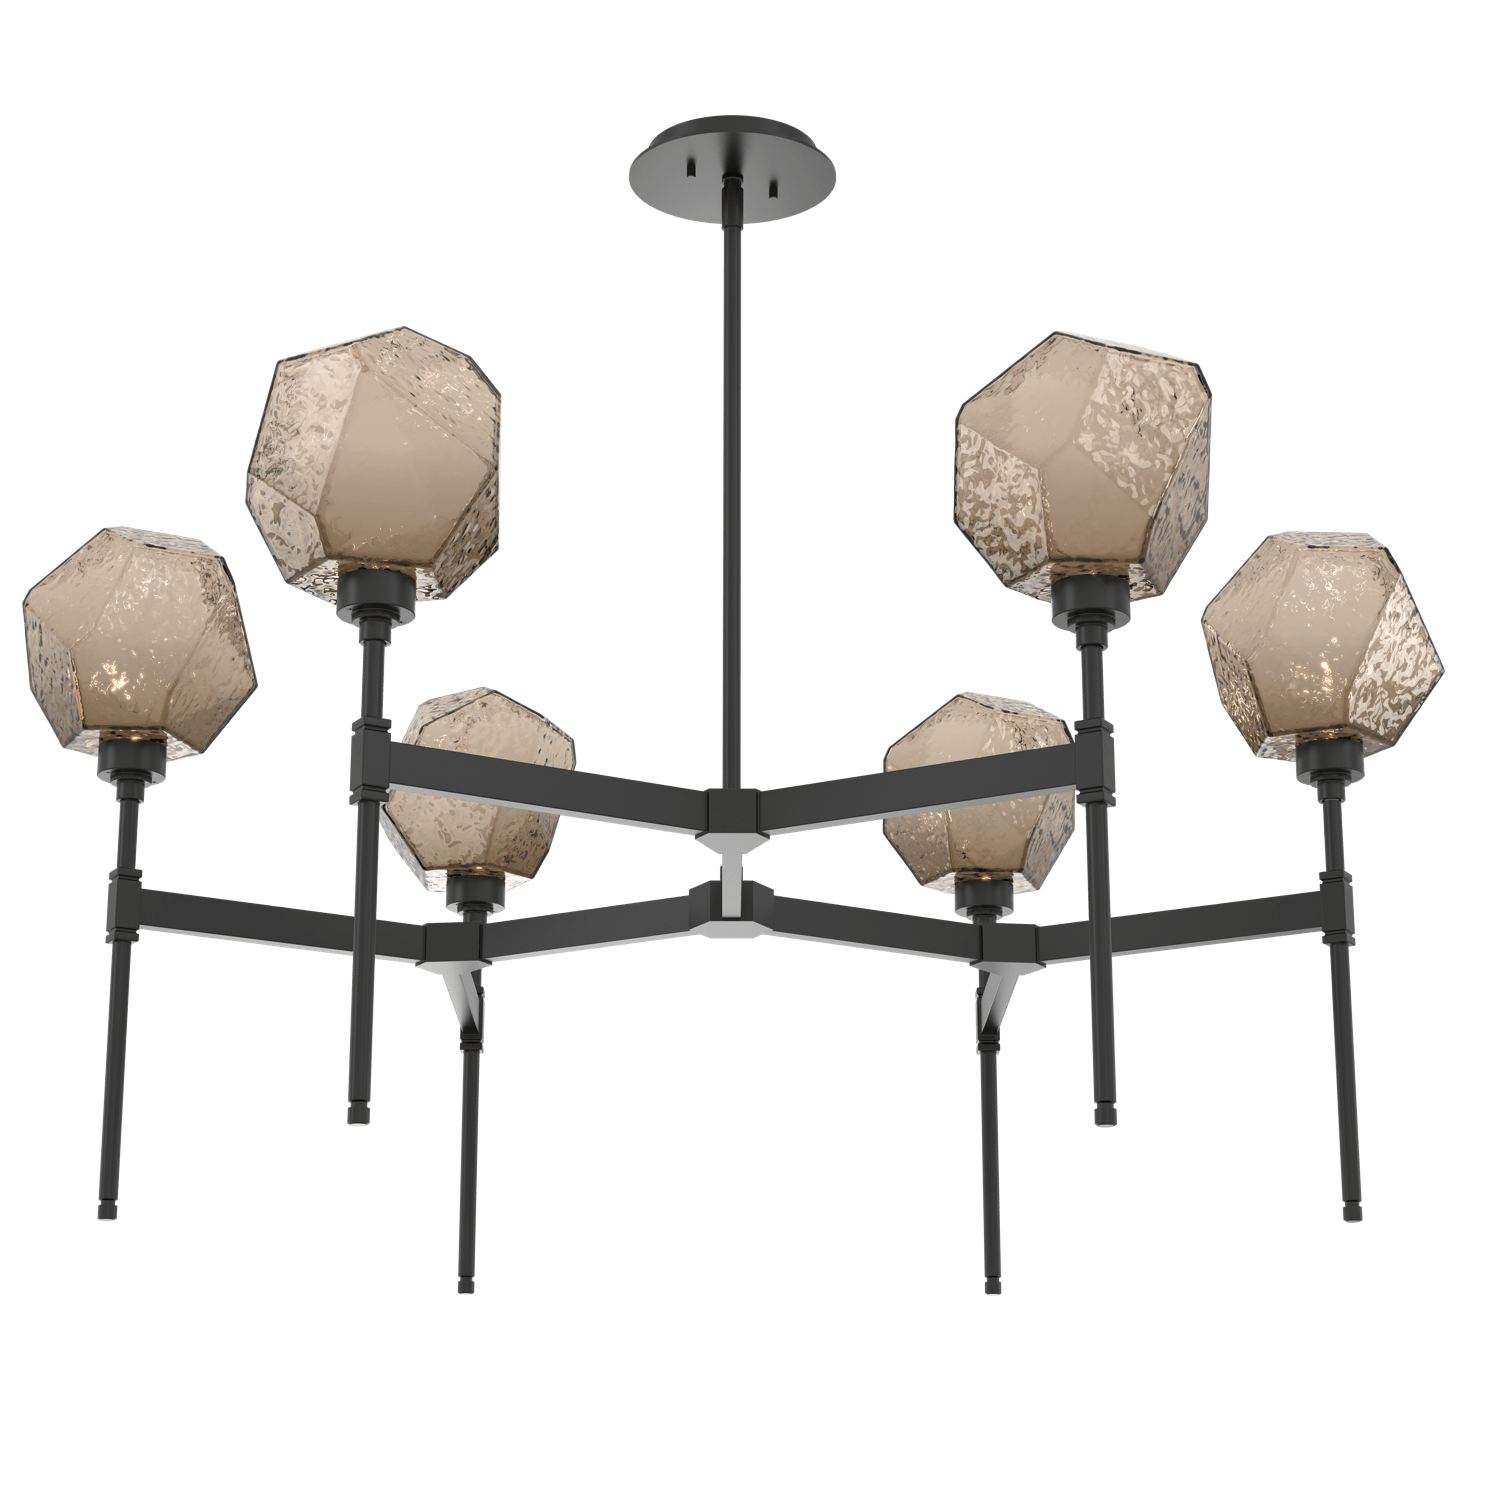 CHB0039-39-MB-B-Hammerton-Studio-Gem-round-belvedere-chandelier-with-matte-black-finish-and-bronze-blown-glass-shades-and-LED-lamping